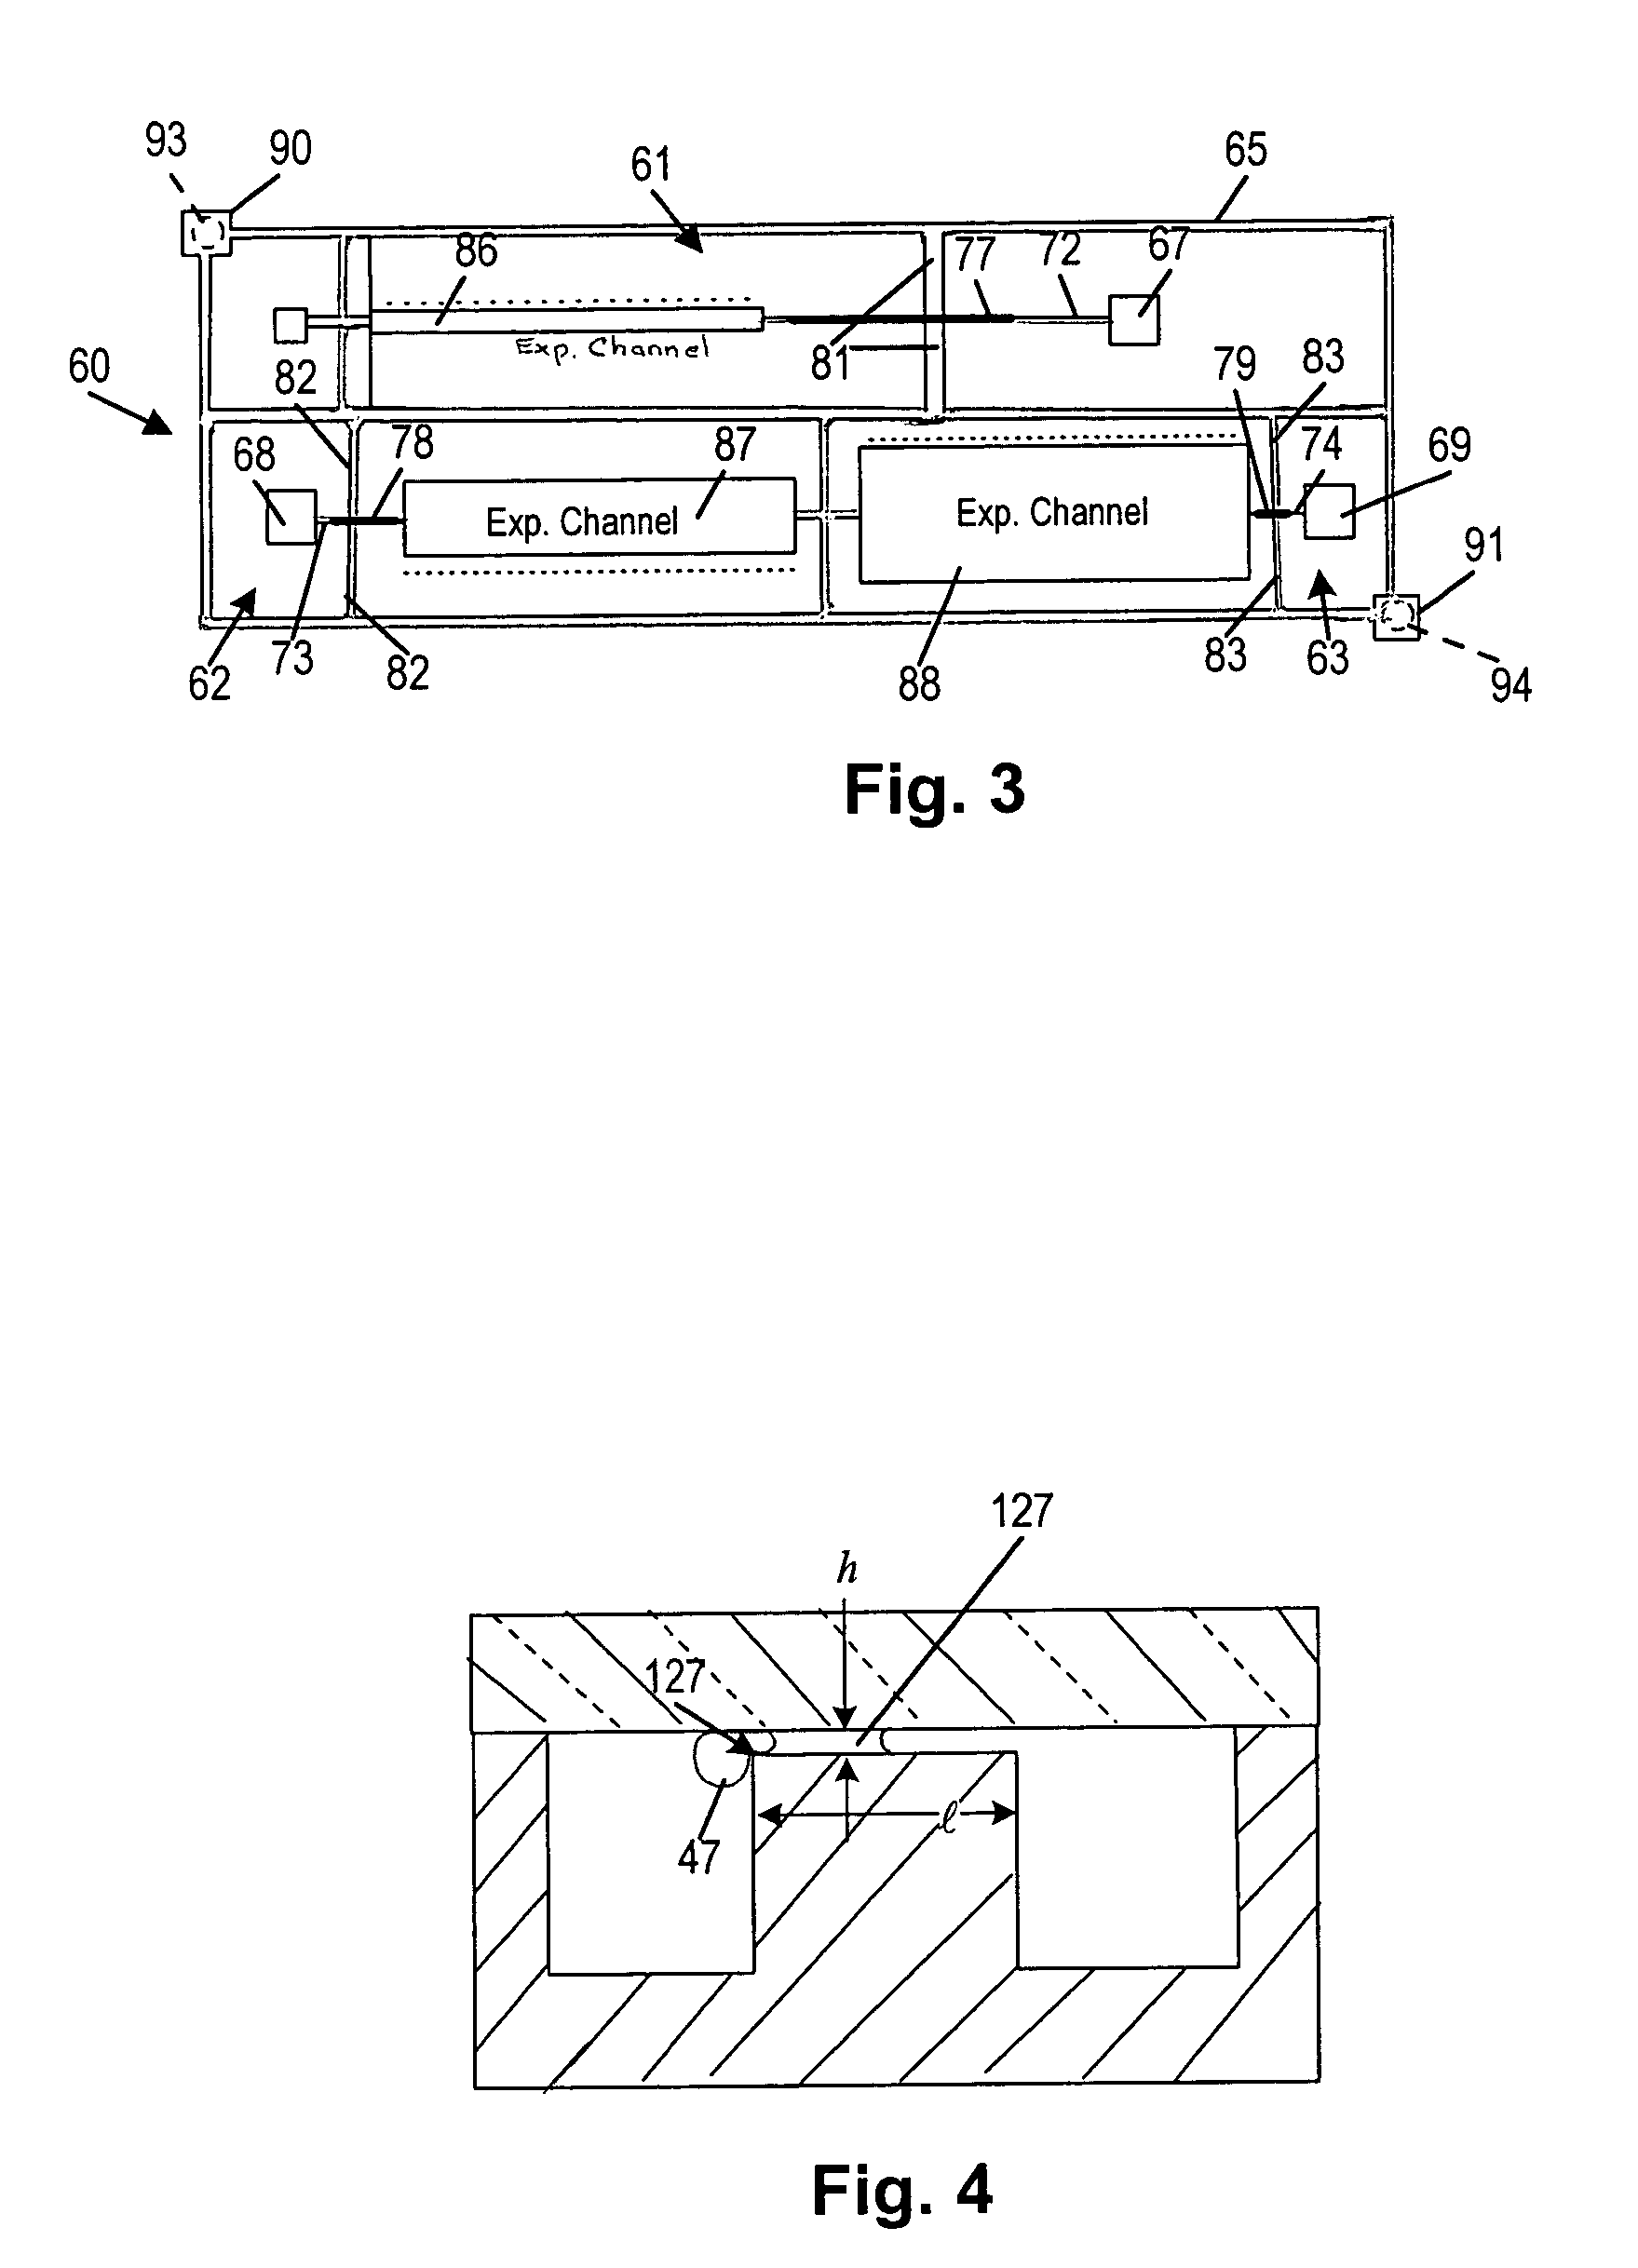 Integrated apparatus and methods for treating liquids